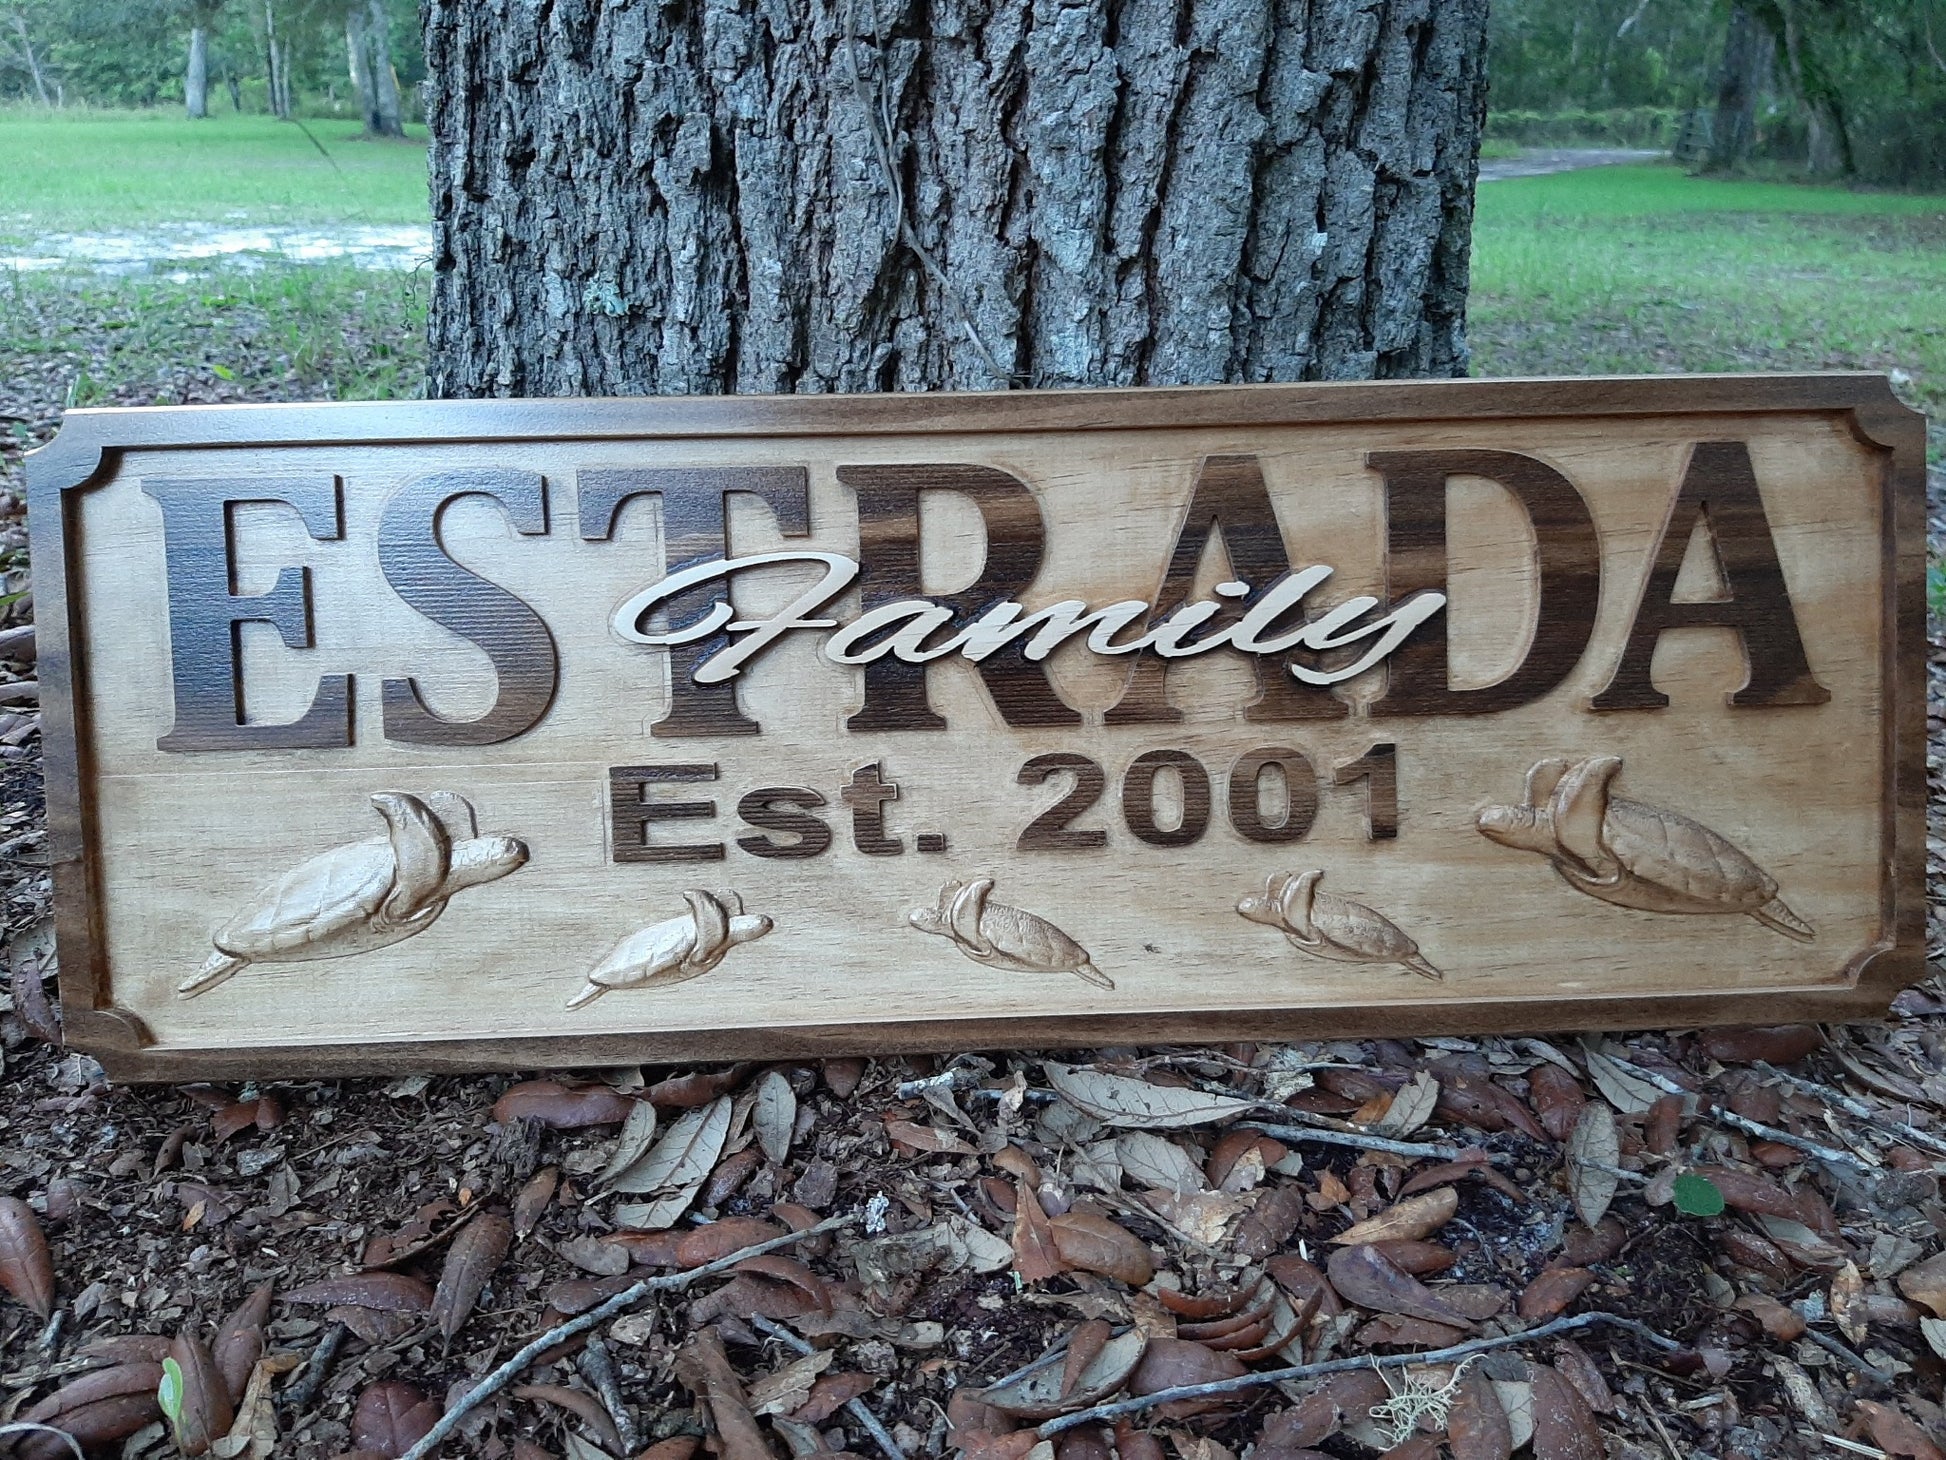 Unique 3D CNC wood carved Family Name sign with Sea Turtles, Nautical Family Name wall art made in the USA.